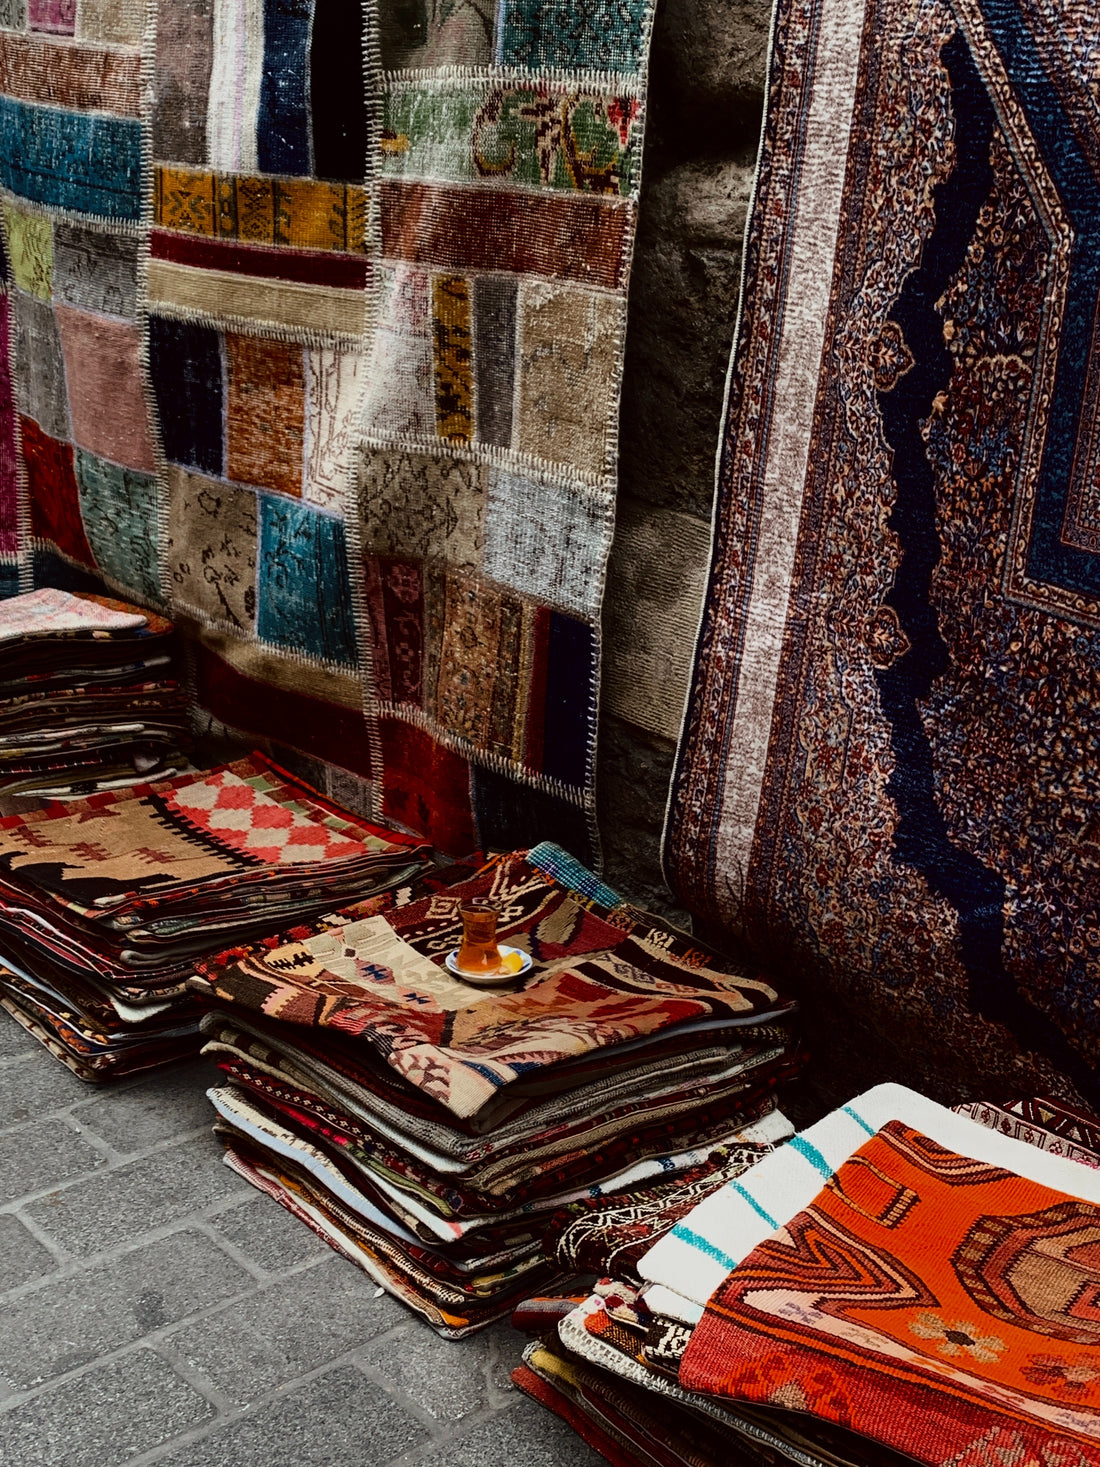 Uncover the Fascinating History of Cushion Covers Across Cultures.